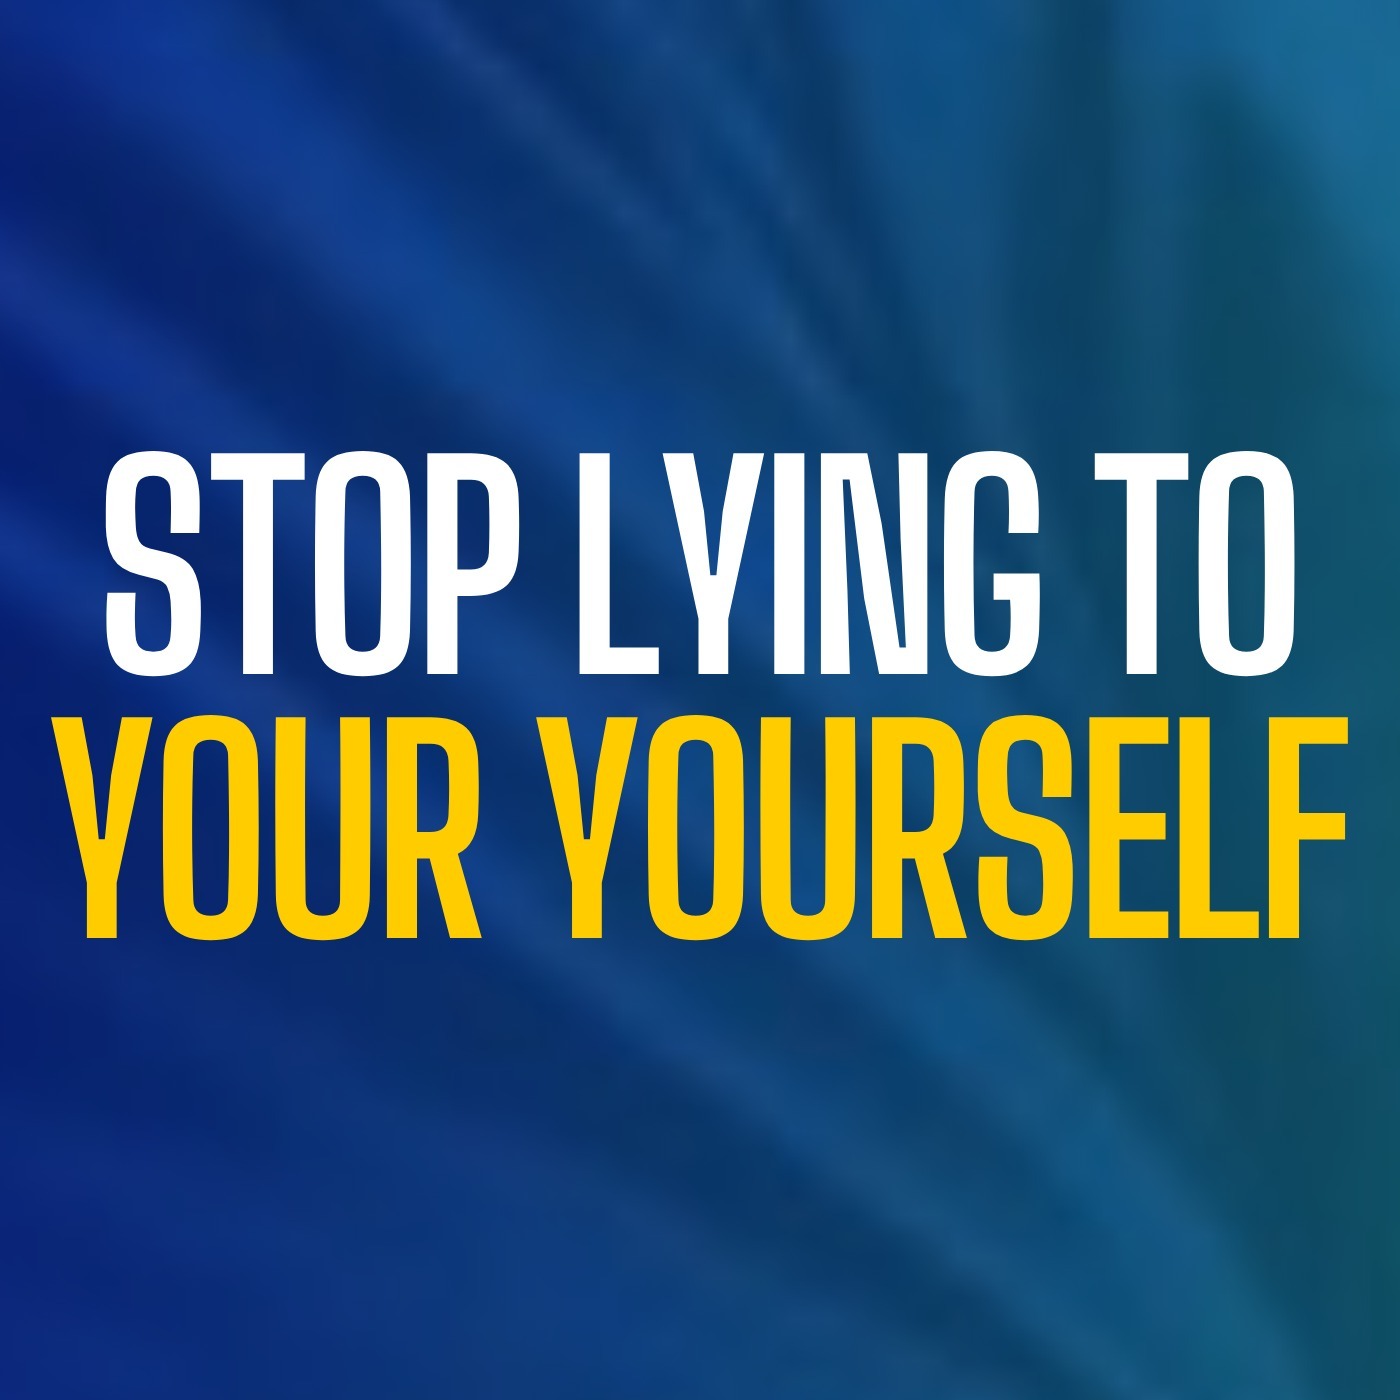 STOP LYING TO YOUR YOURSELF - Andrew Tate Motivational Speech